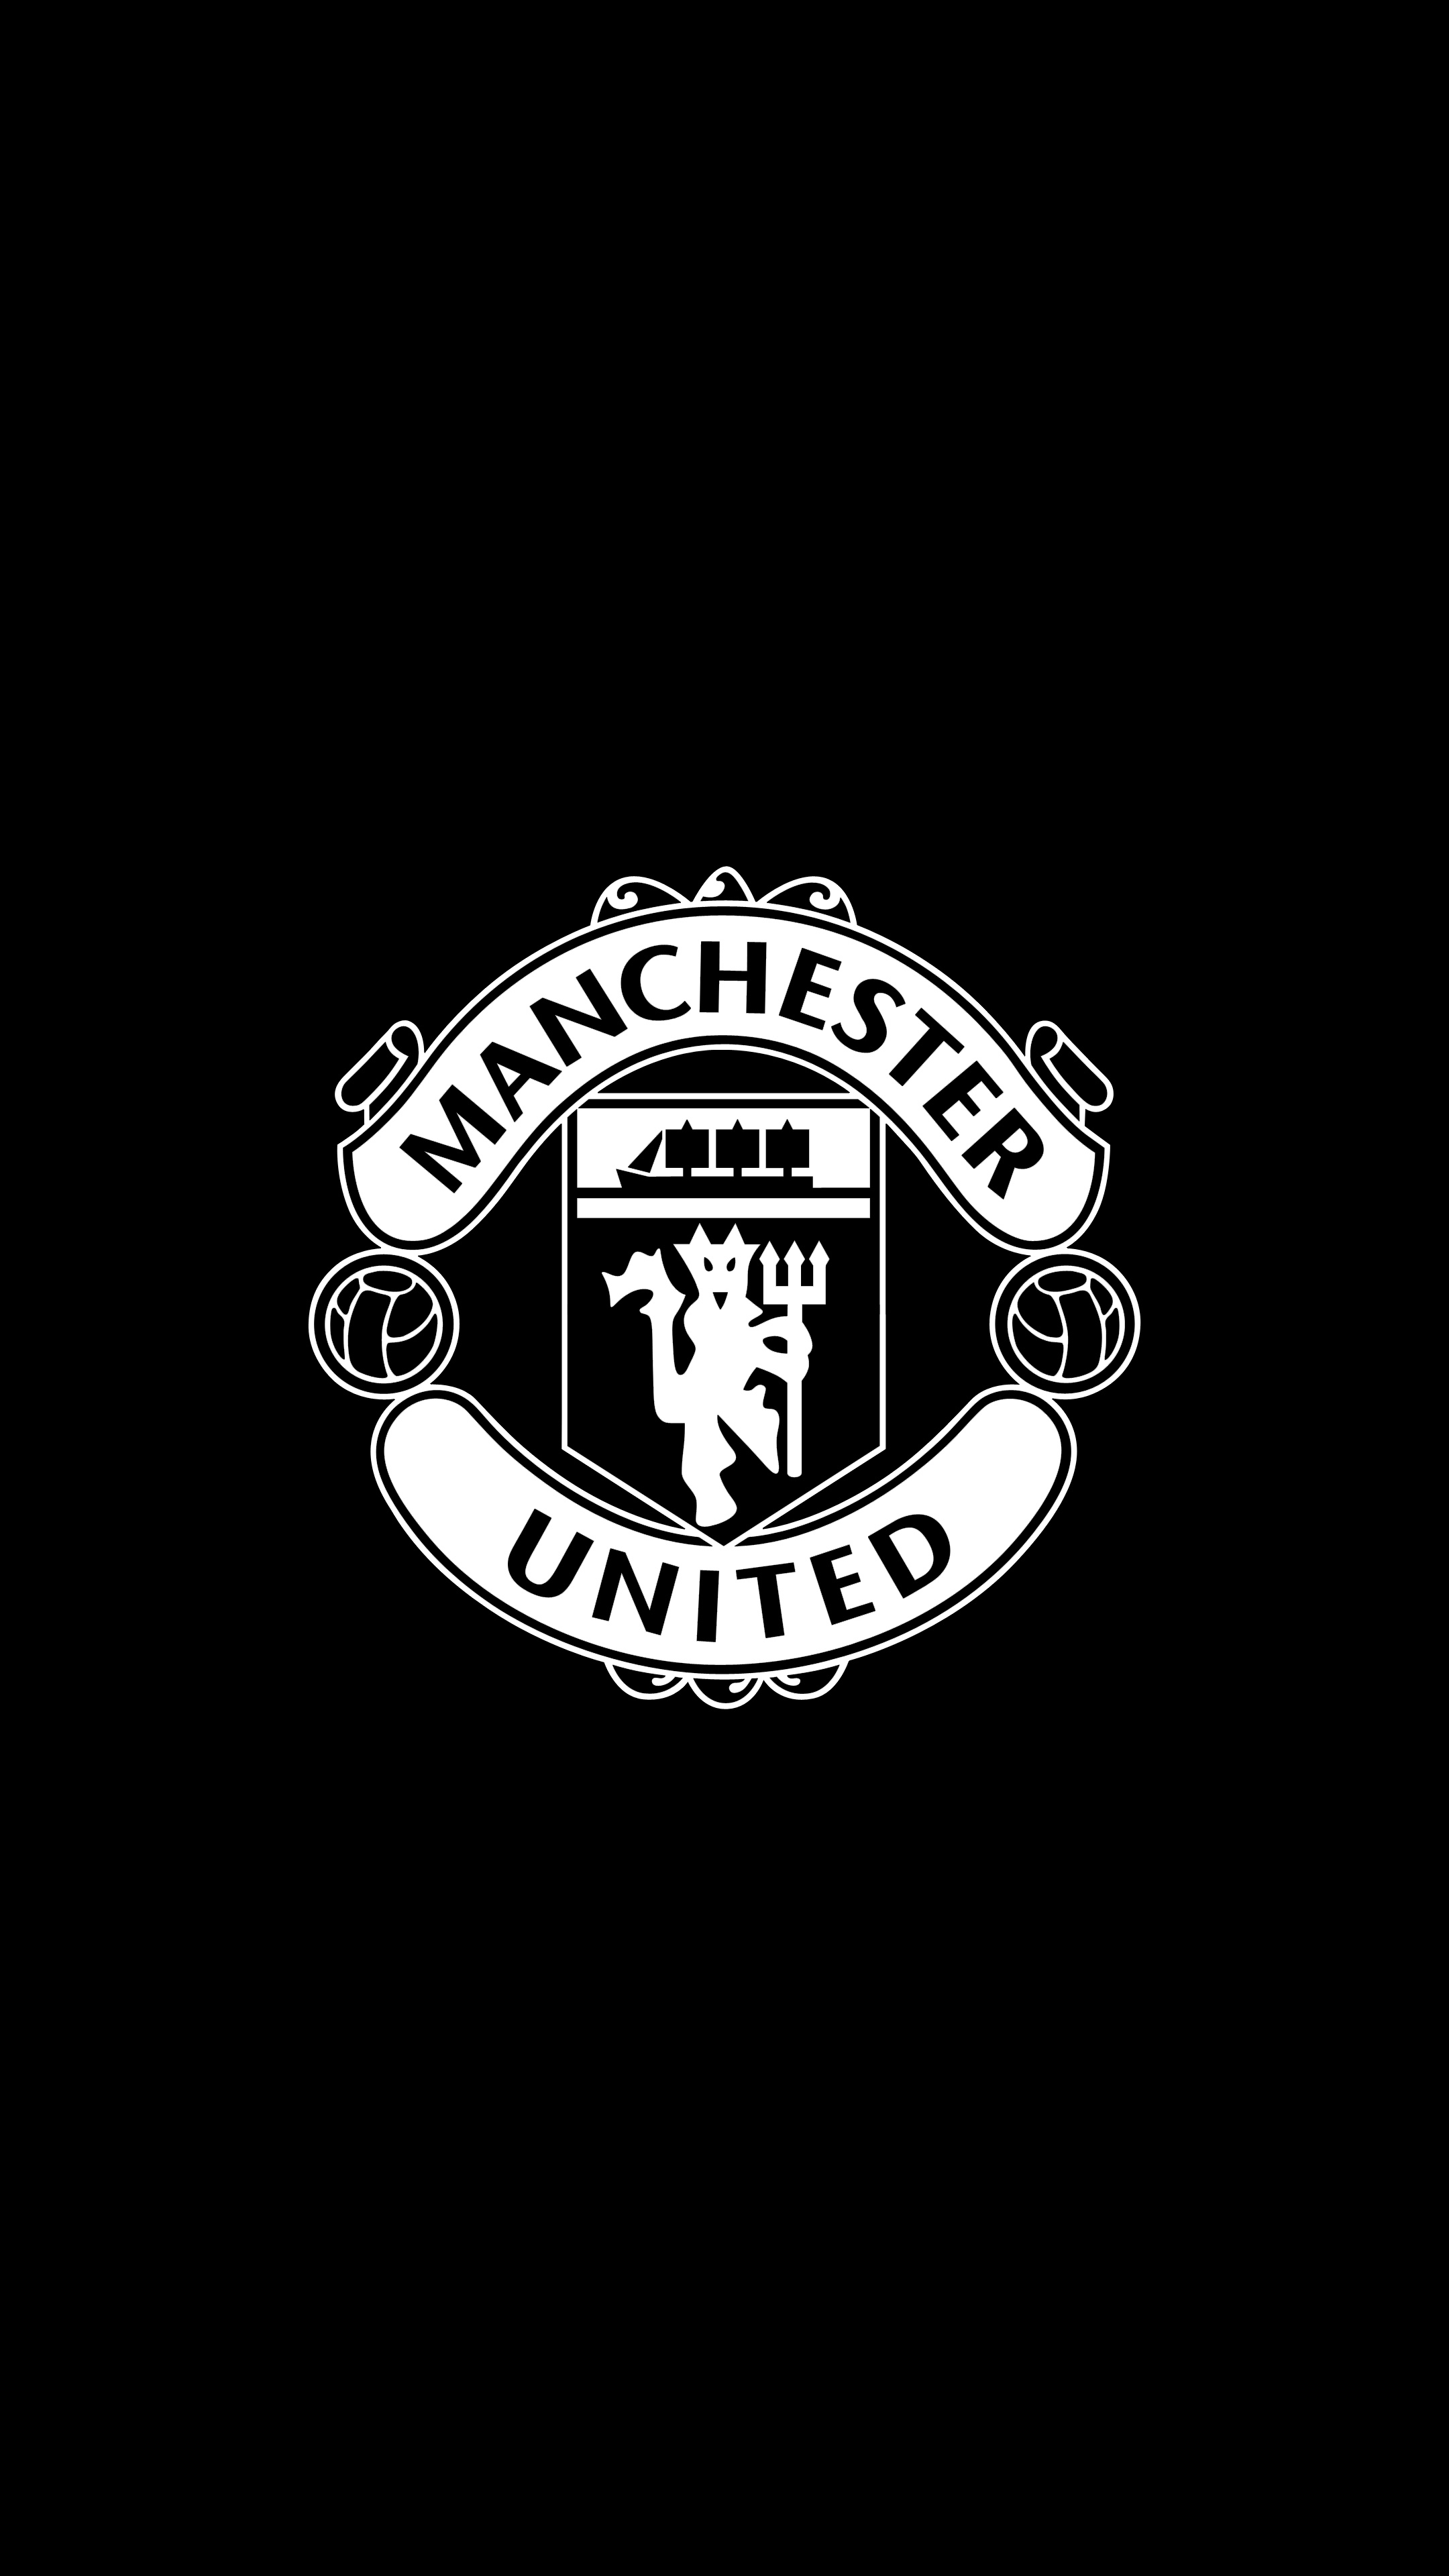 Manchester United: The team have won the European Cup, UEFA Champions League three times. 2160x3840 4K Background.